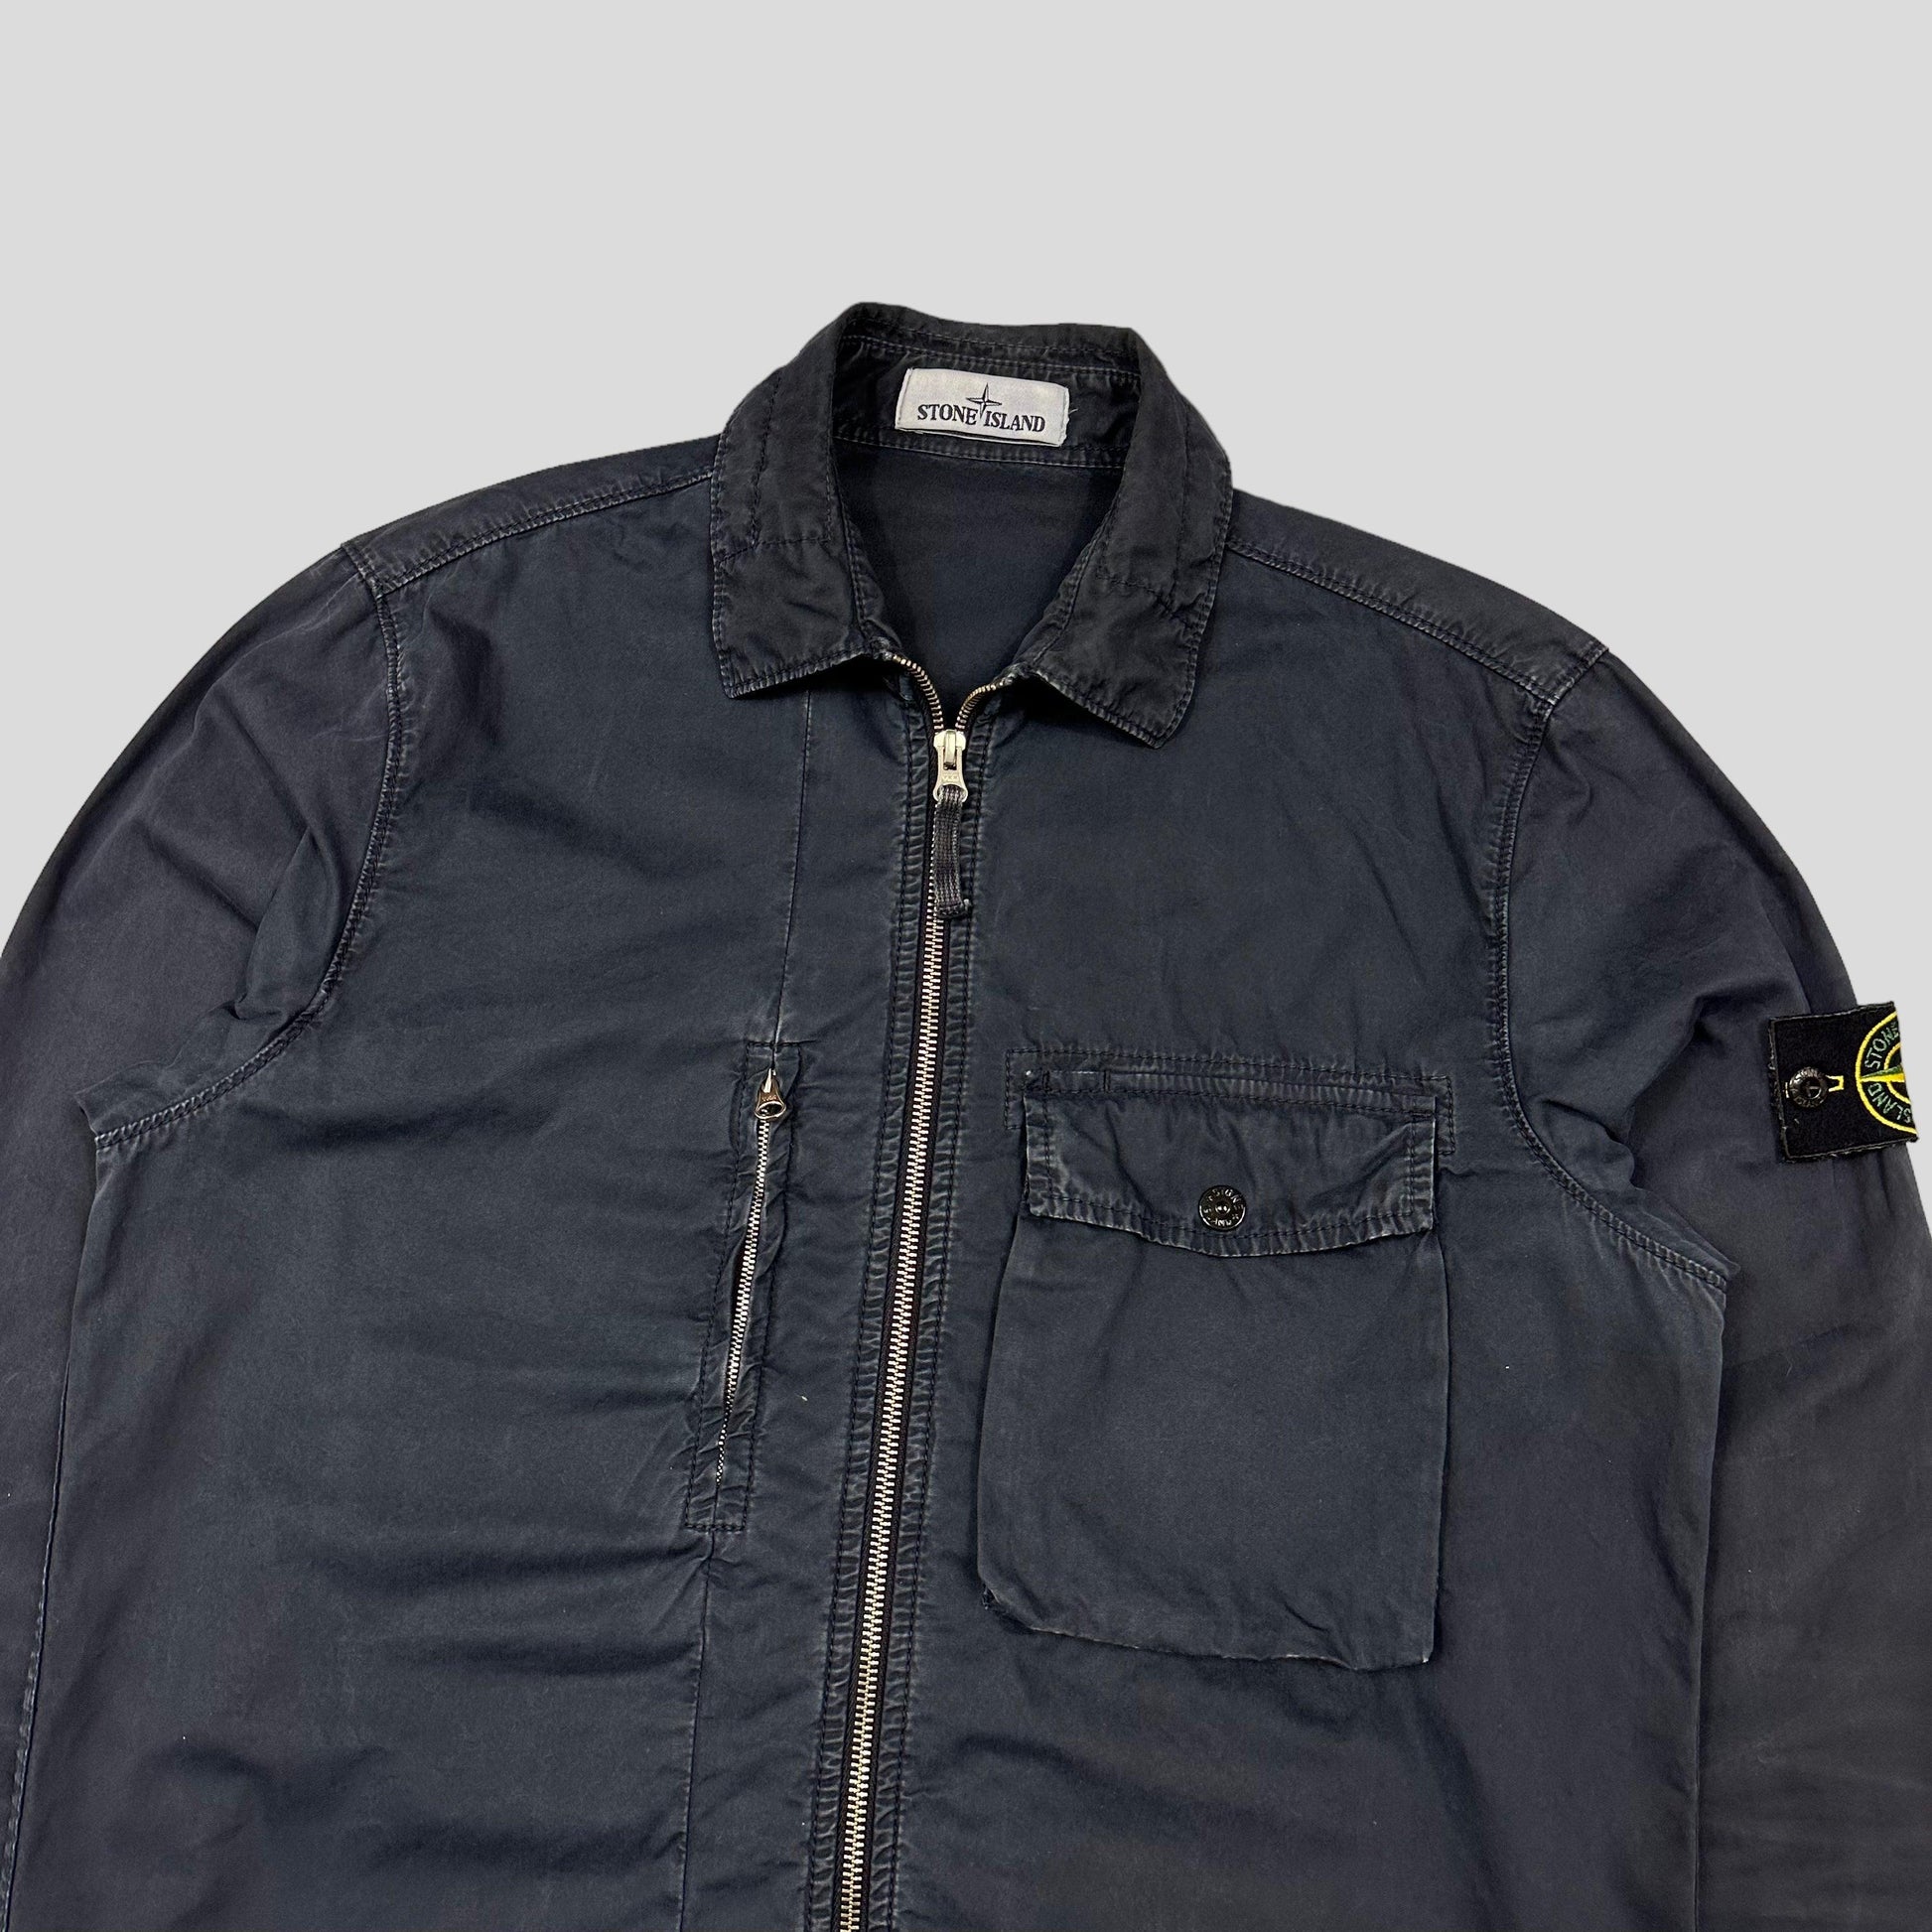 Stone Island Multipocket Overshirt - M - Known Source